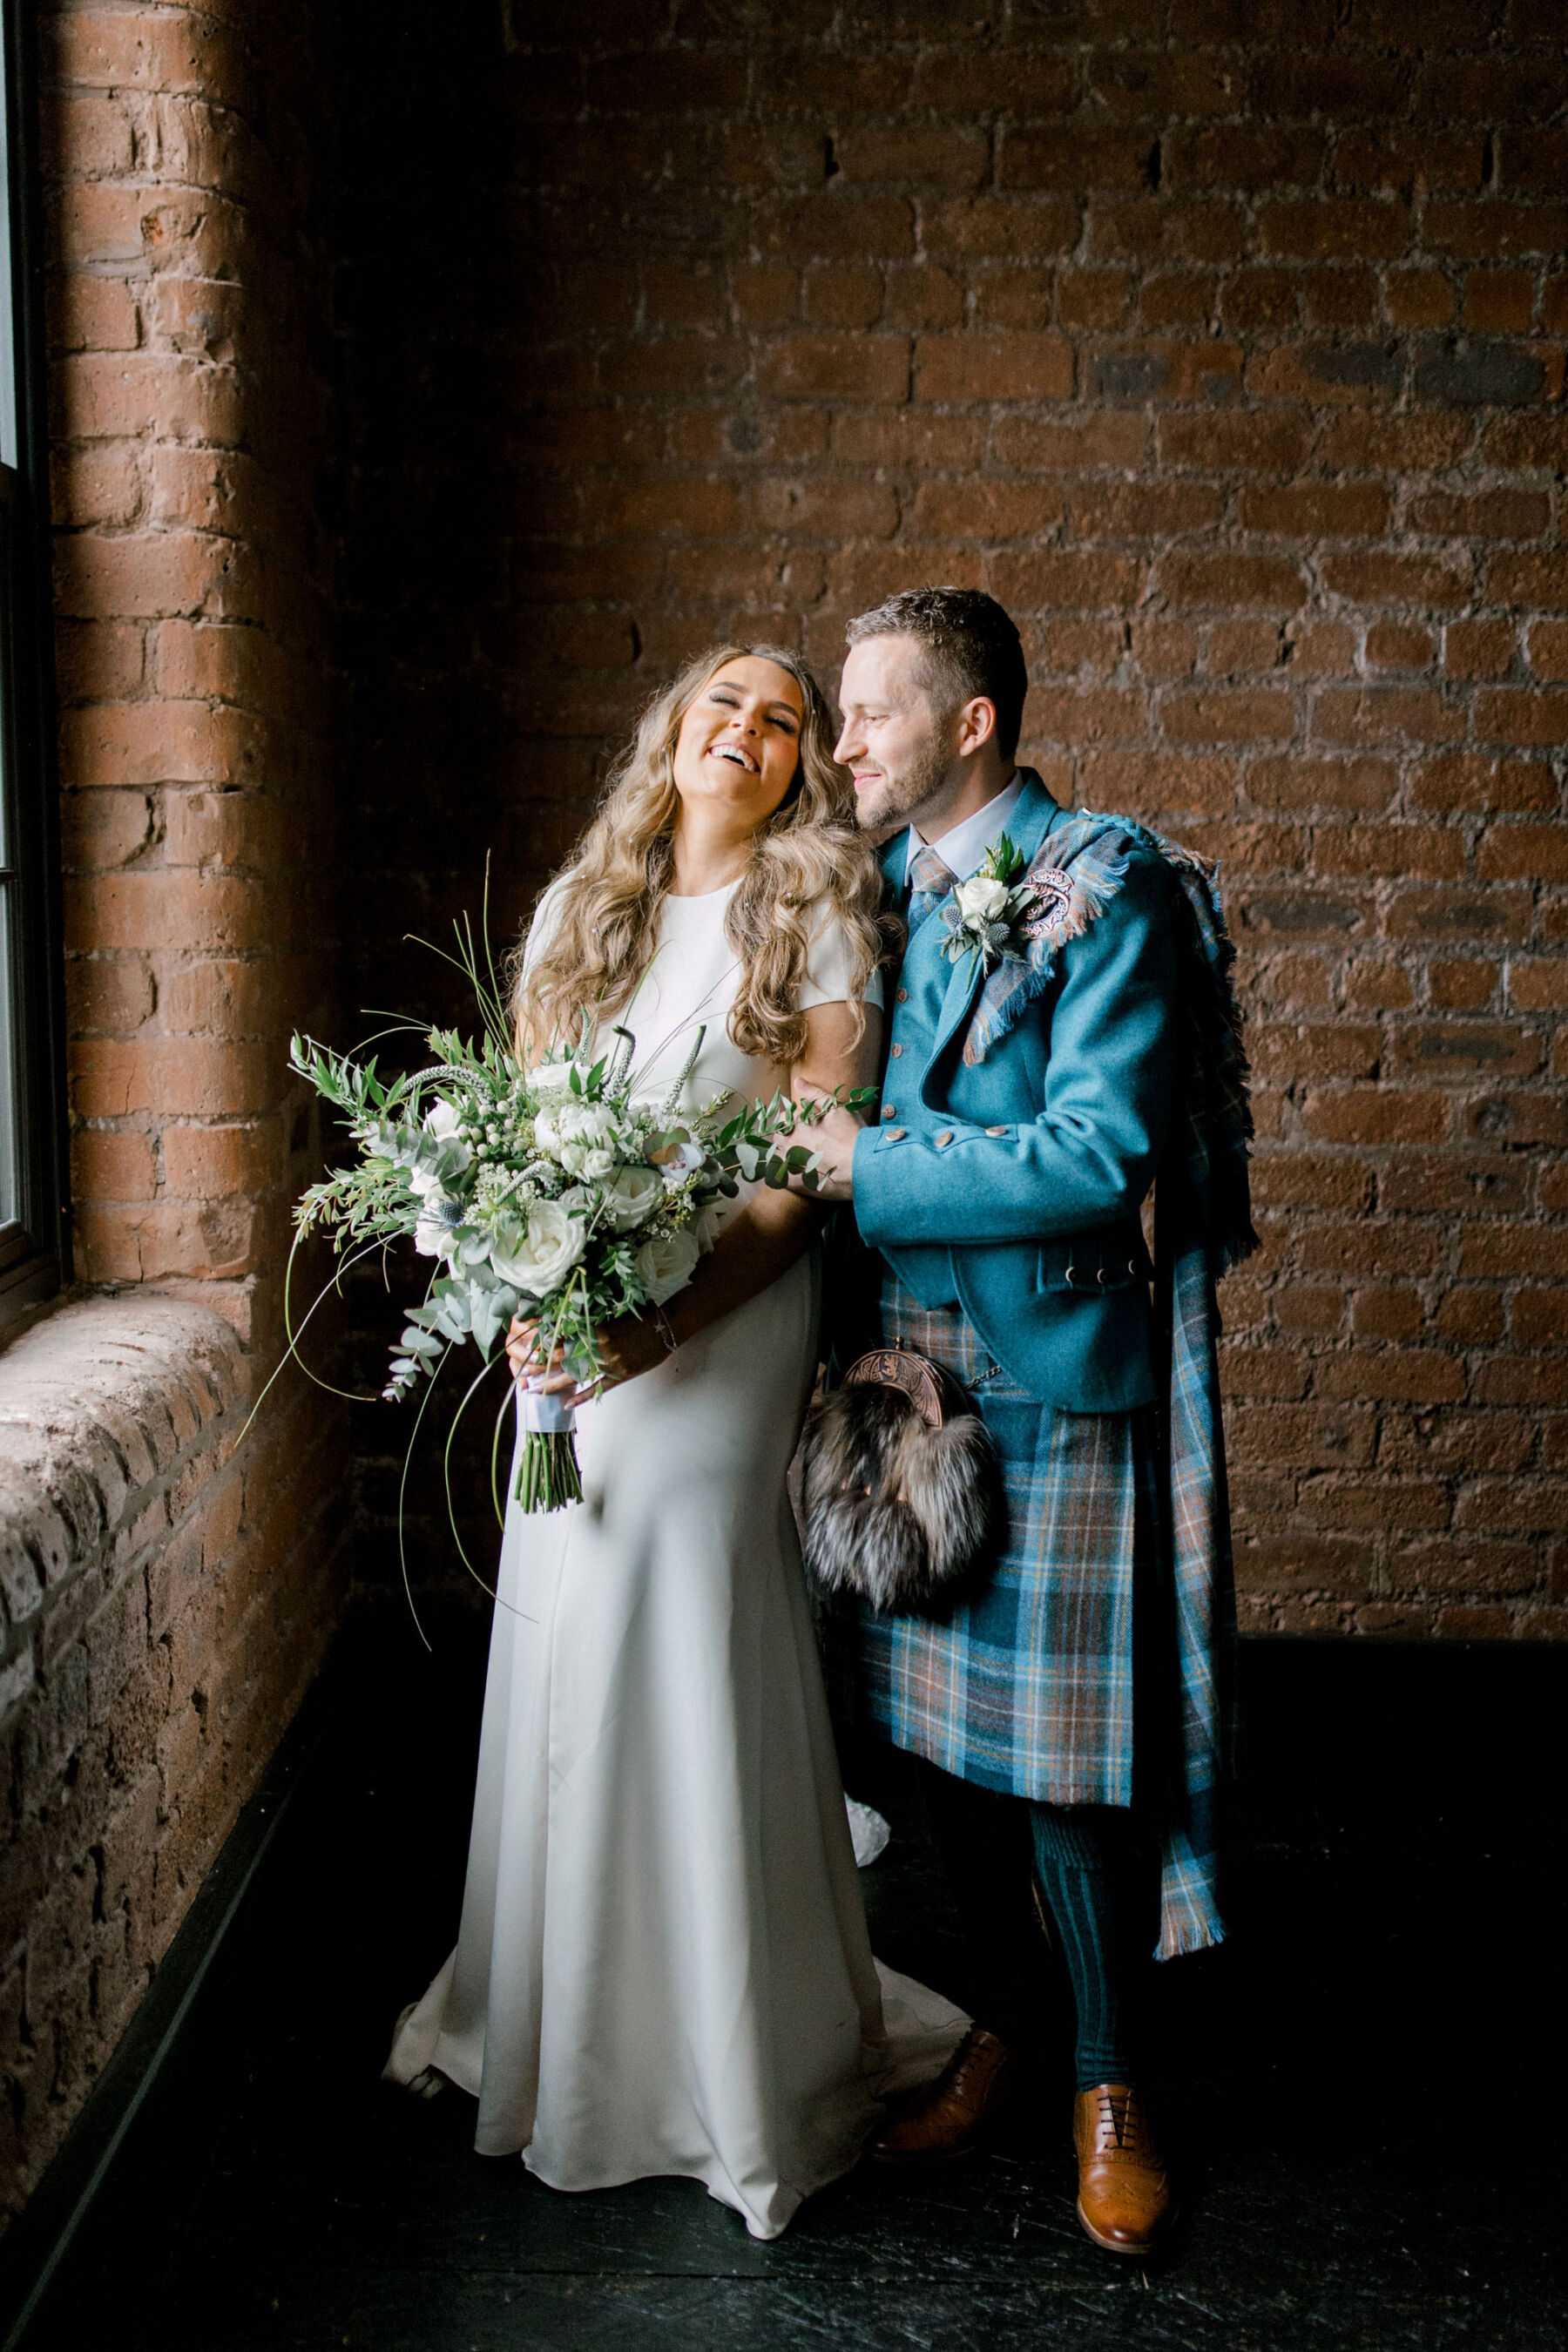 Bride in Sarah Seven and groom in a kilt